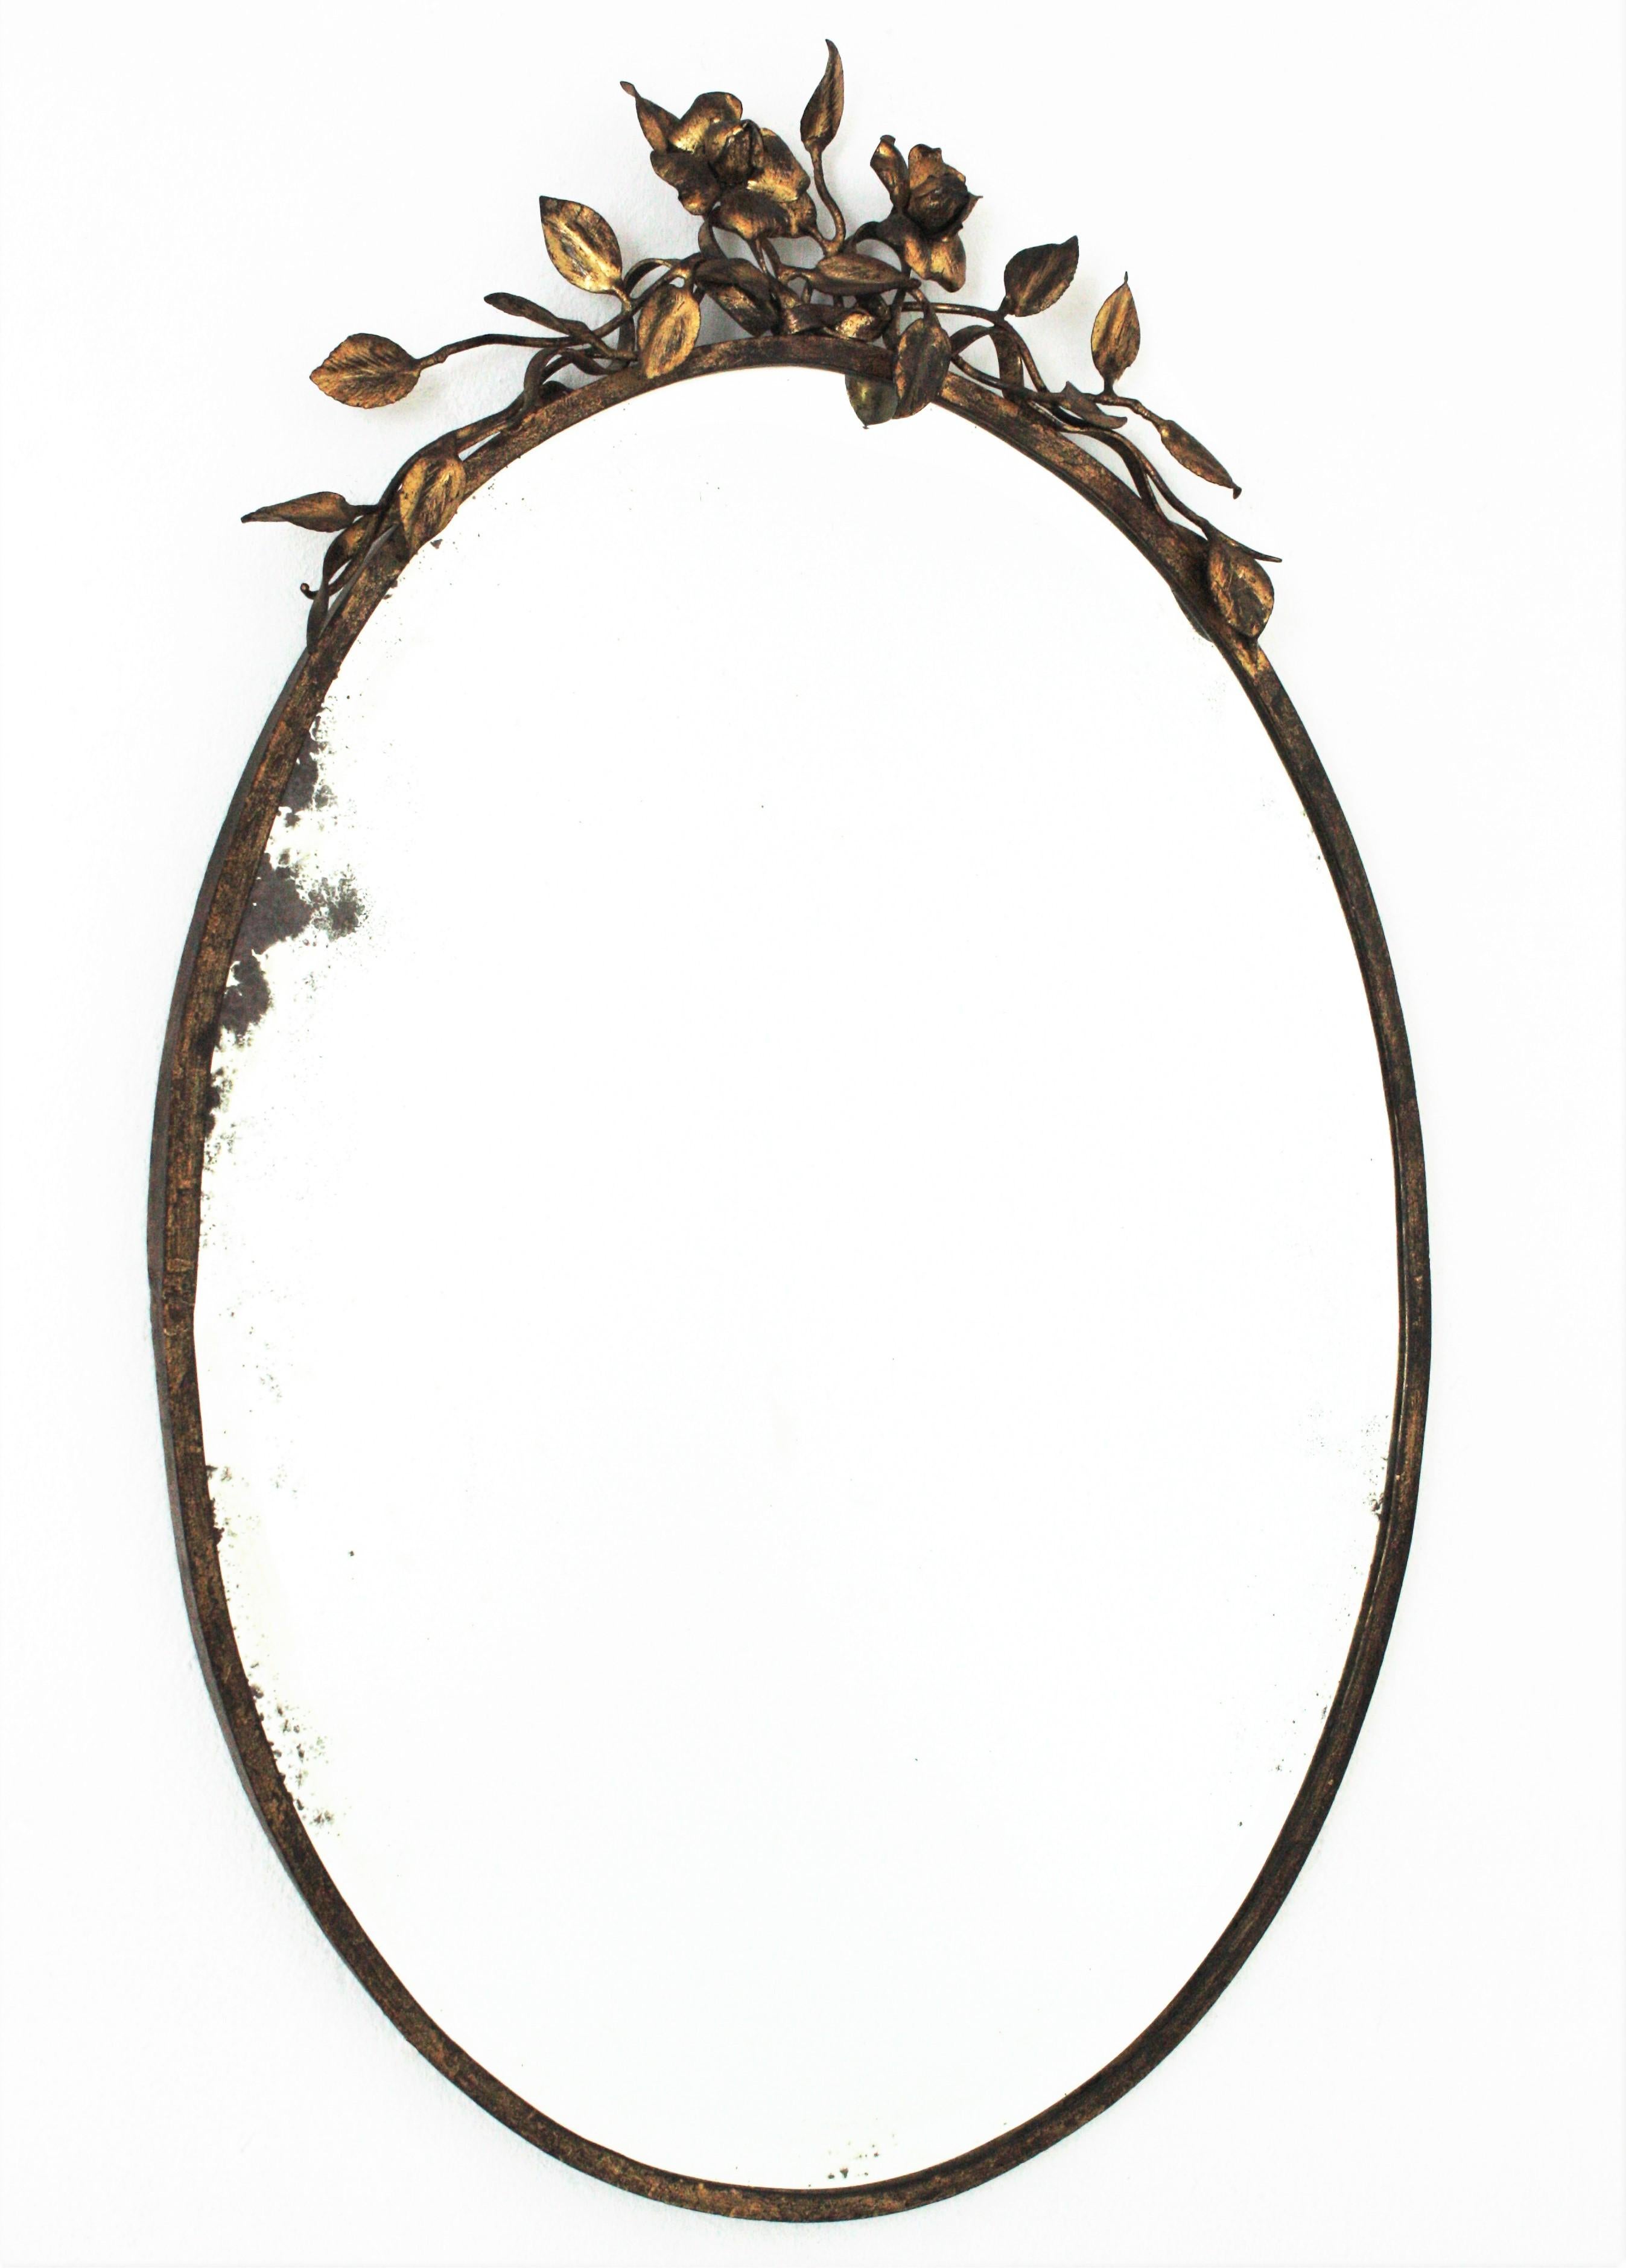 Oval mirror with foliage floral crest, gilt iron, gold leaf, beveled glass. France, 1940s
Elegant oval mirror with floral details on the top. 
Terrific aged patina and original beveled glass mirror.
It will be a nice addition to a powder room,